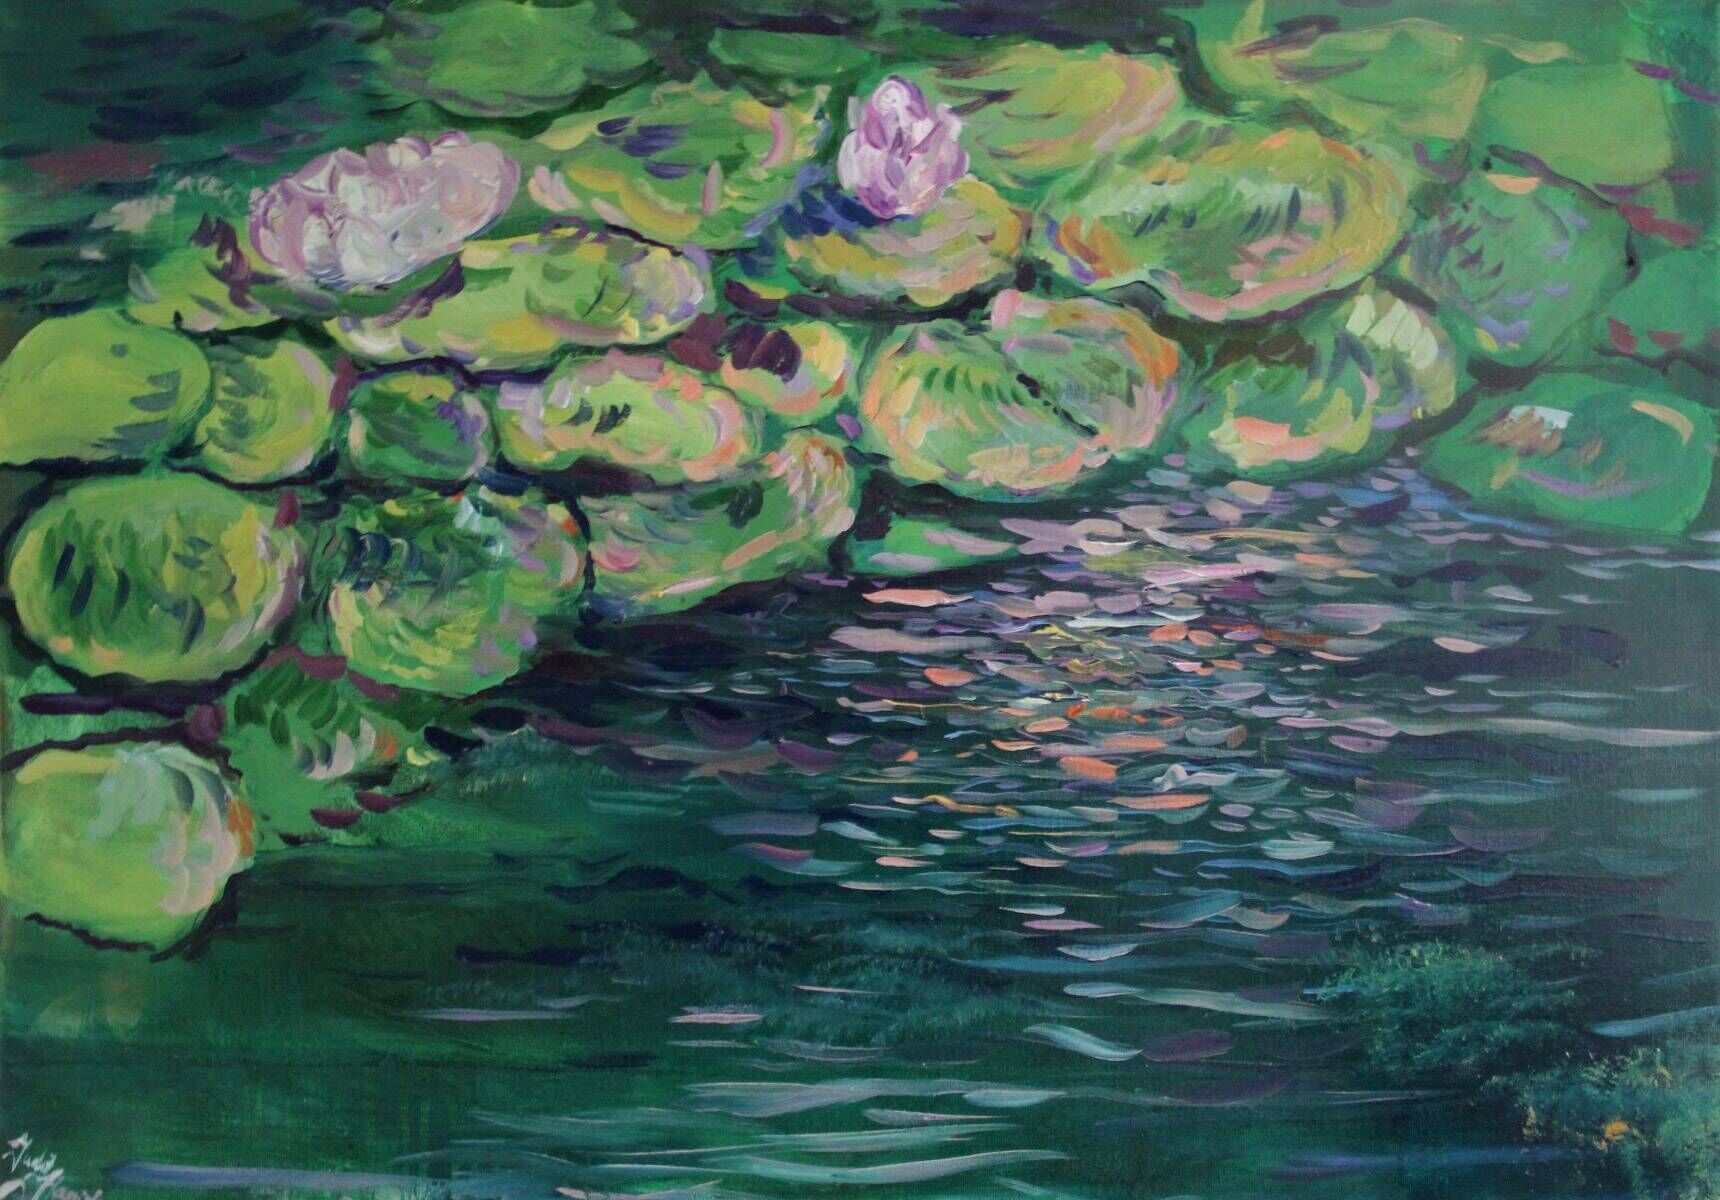 Water lilies under the willow